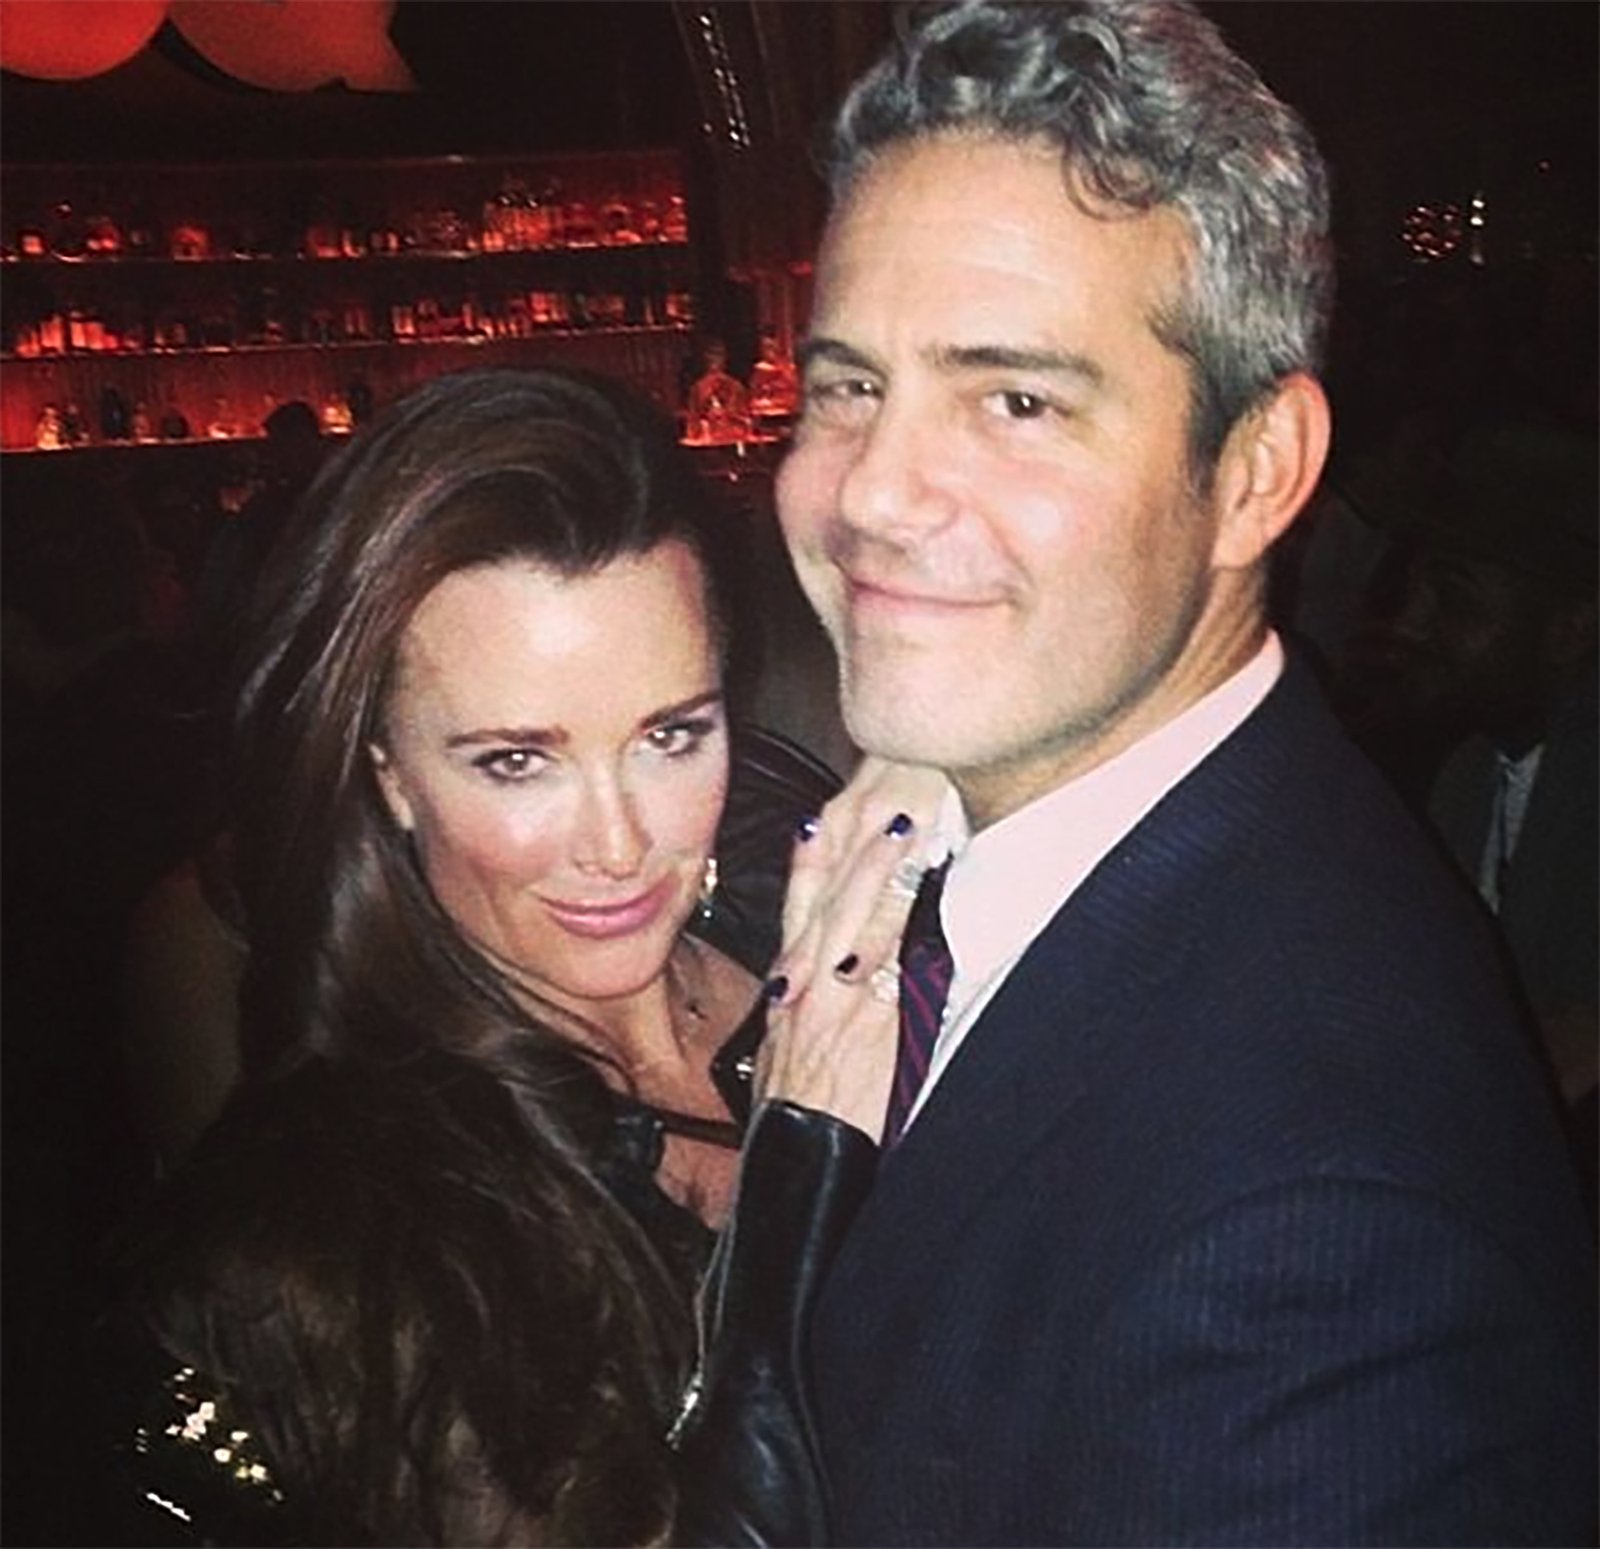 Kyle Richards and Andy Cohen.